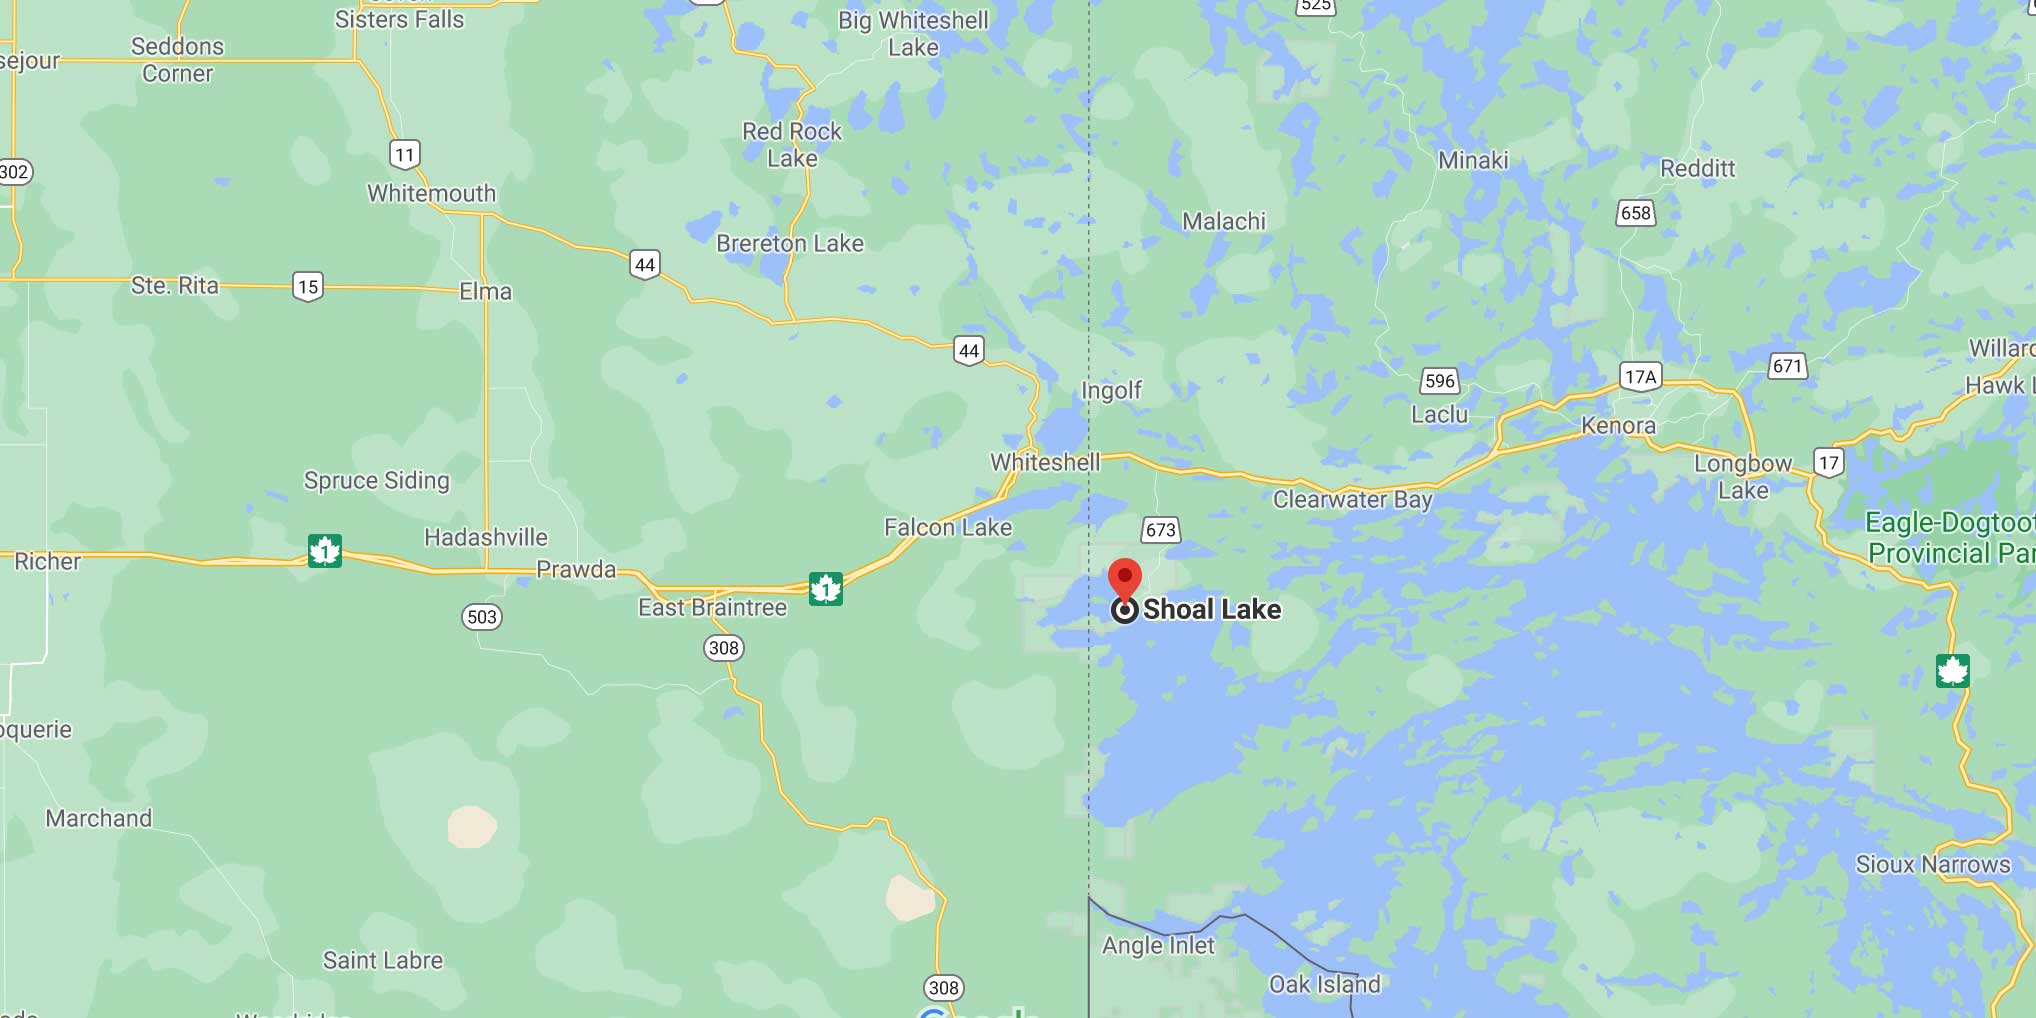 A map with Pioneer Camp Manitoba's location indicated. Links to Google maps directions.